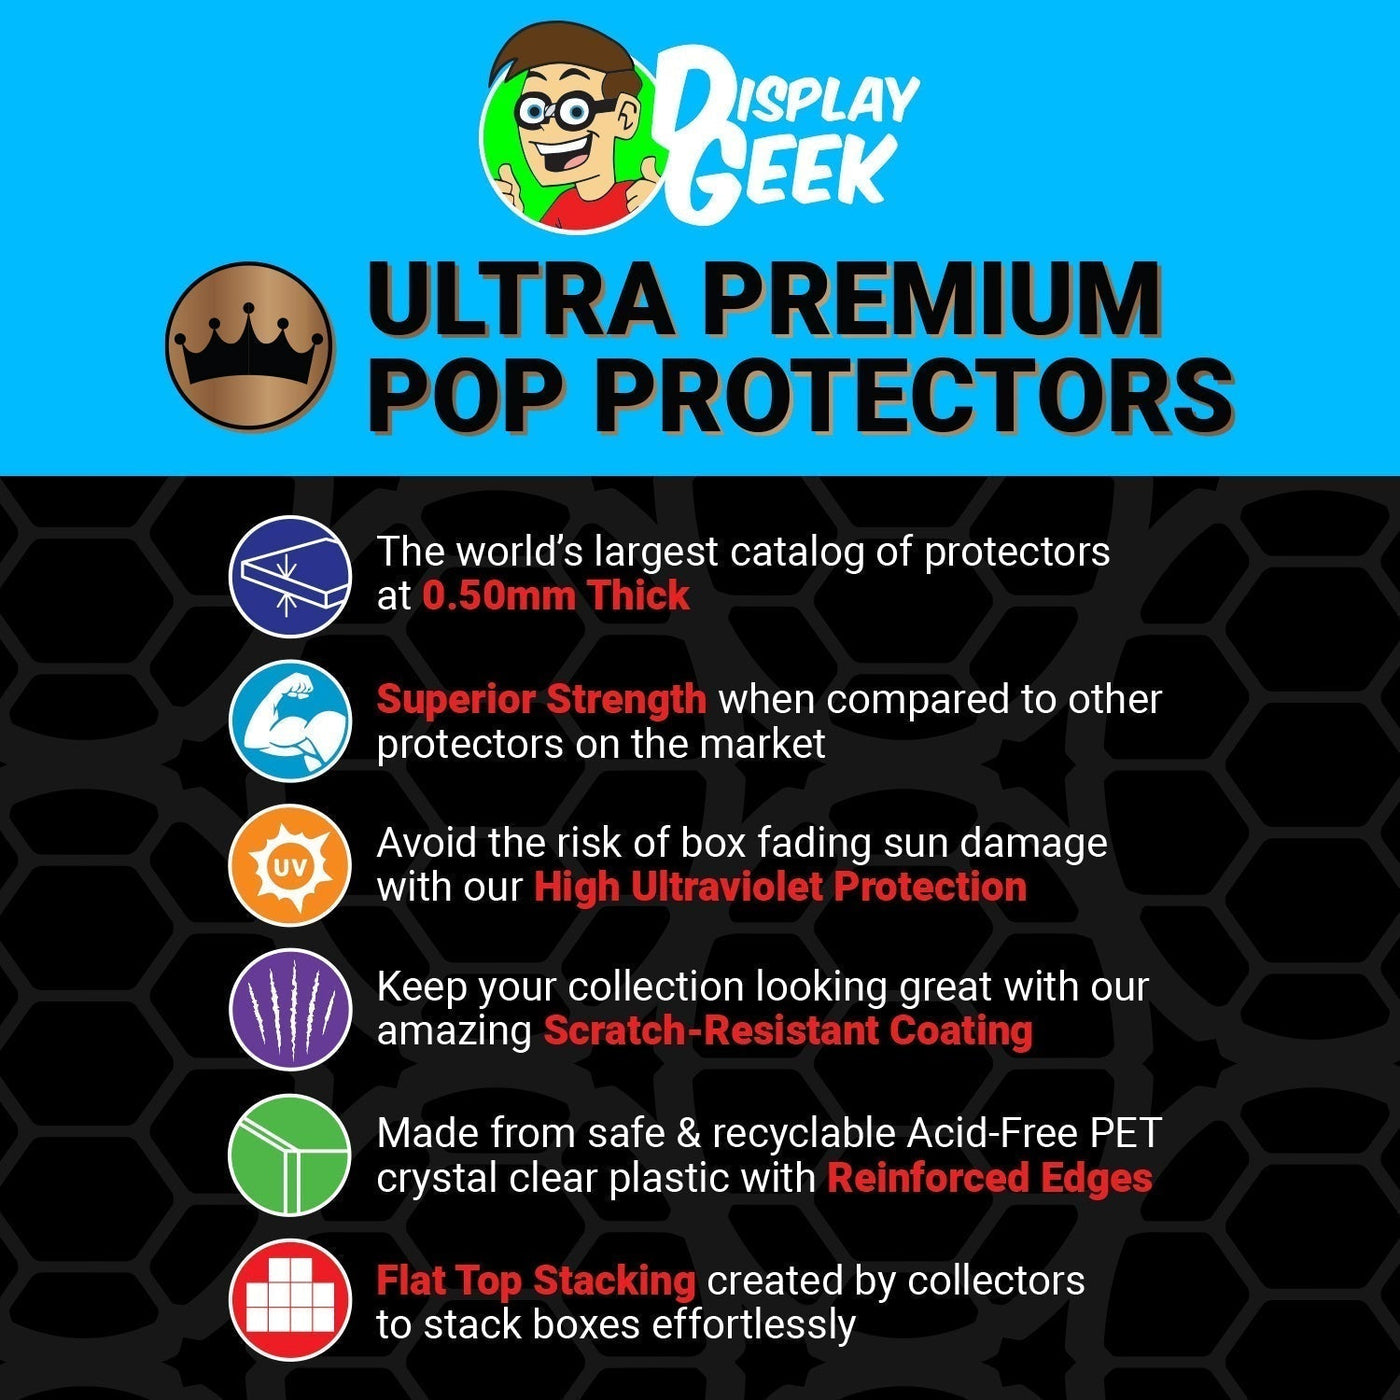 Pop Protector for Tinker Bell in Lantern #1331 Funko Pop Deluxe on The Protector Guide App by Display Geek